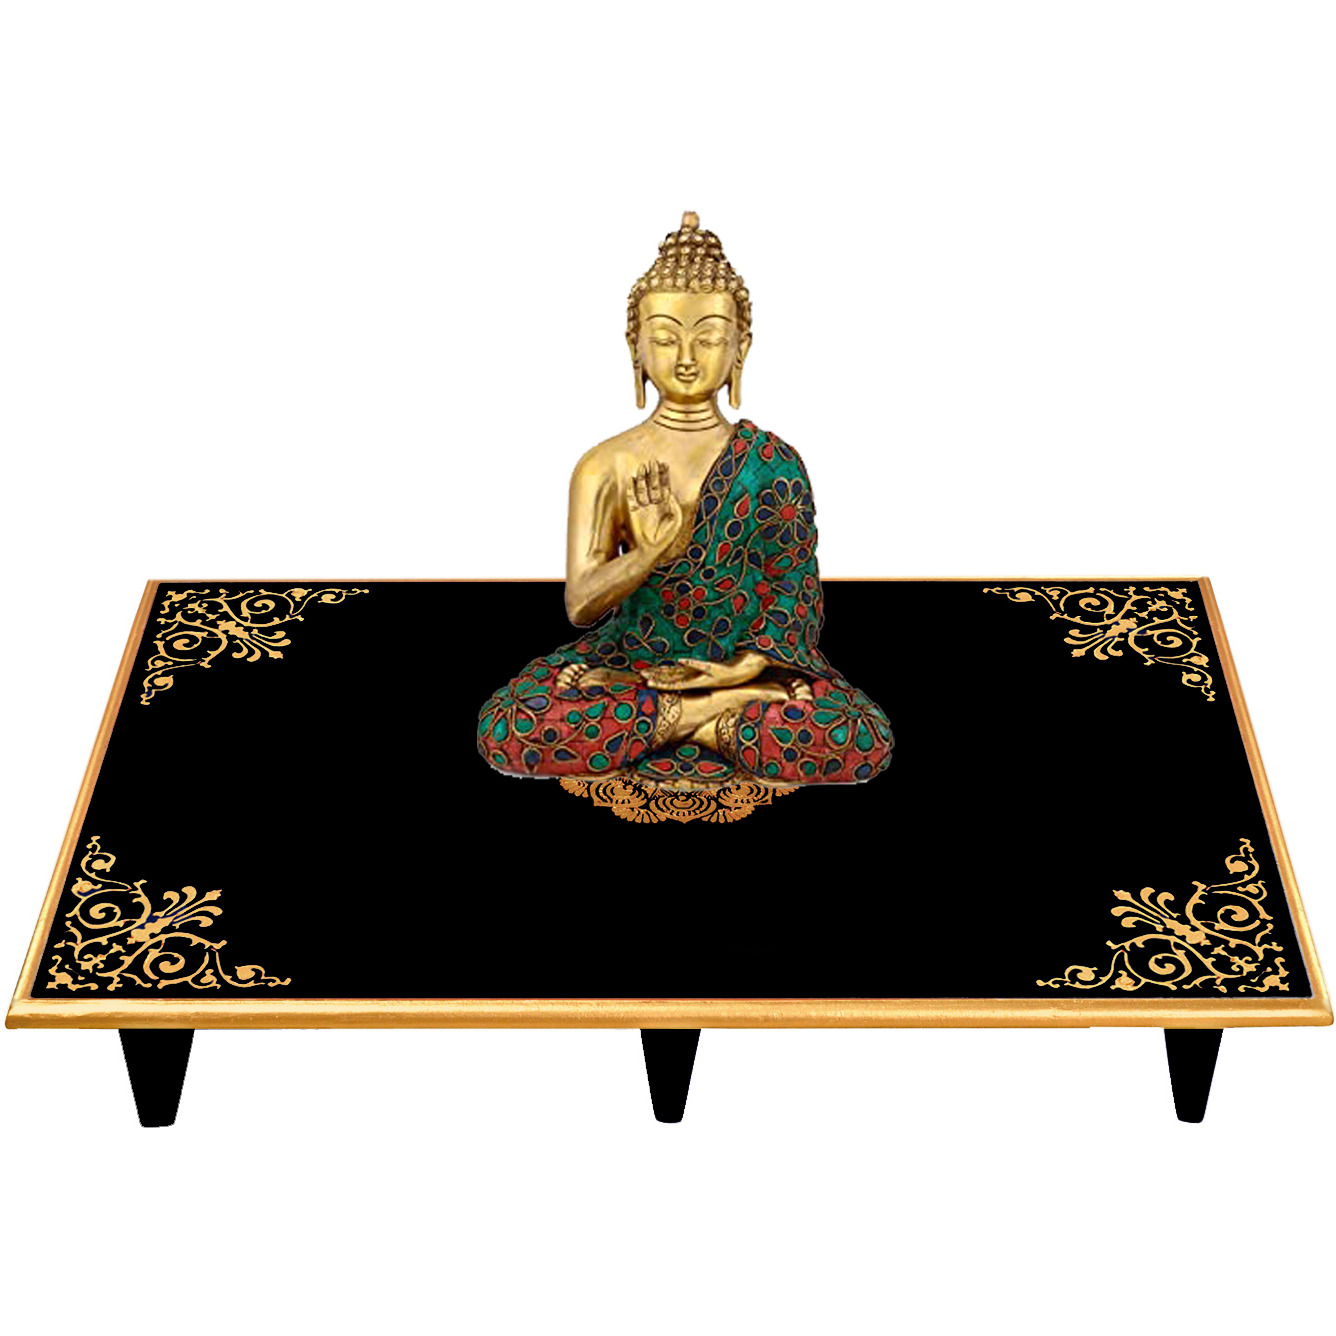 Wooden Home D??cor Black Rectangle Coffee Table (24X15X4 Inch) (Size: 24X15X4, Color: Black)